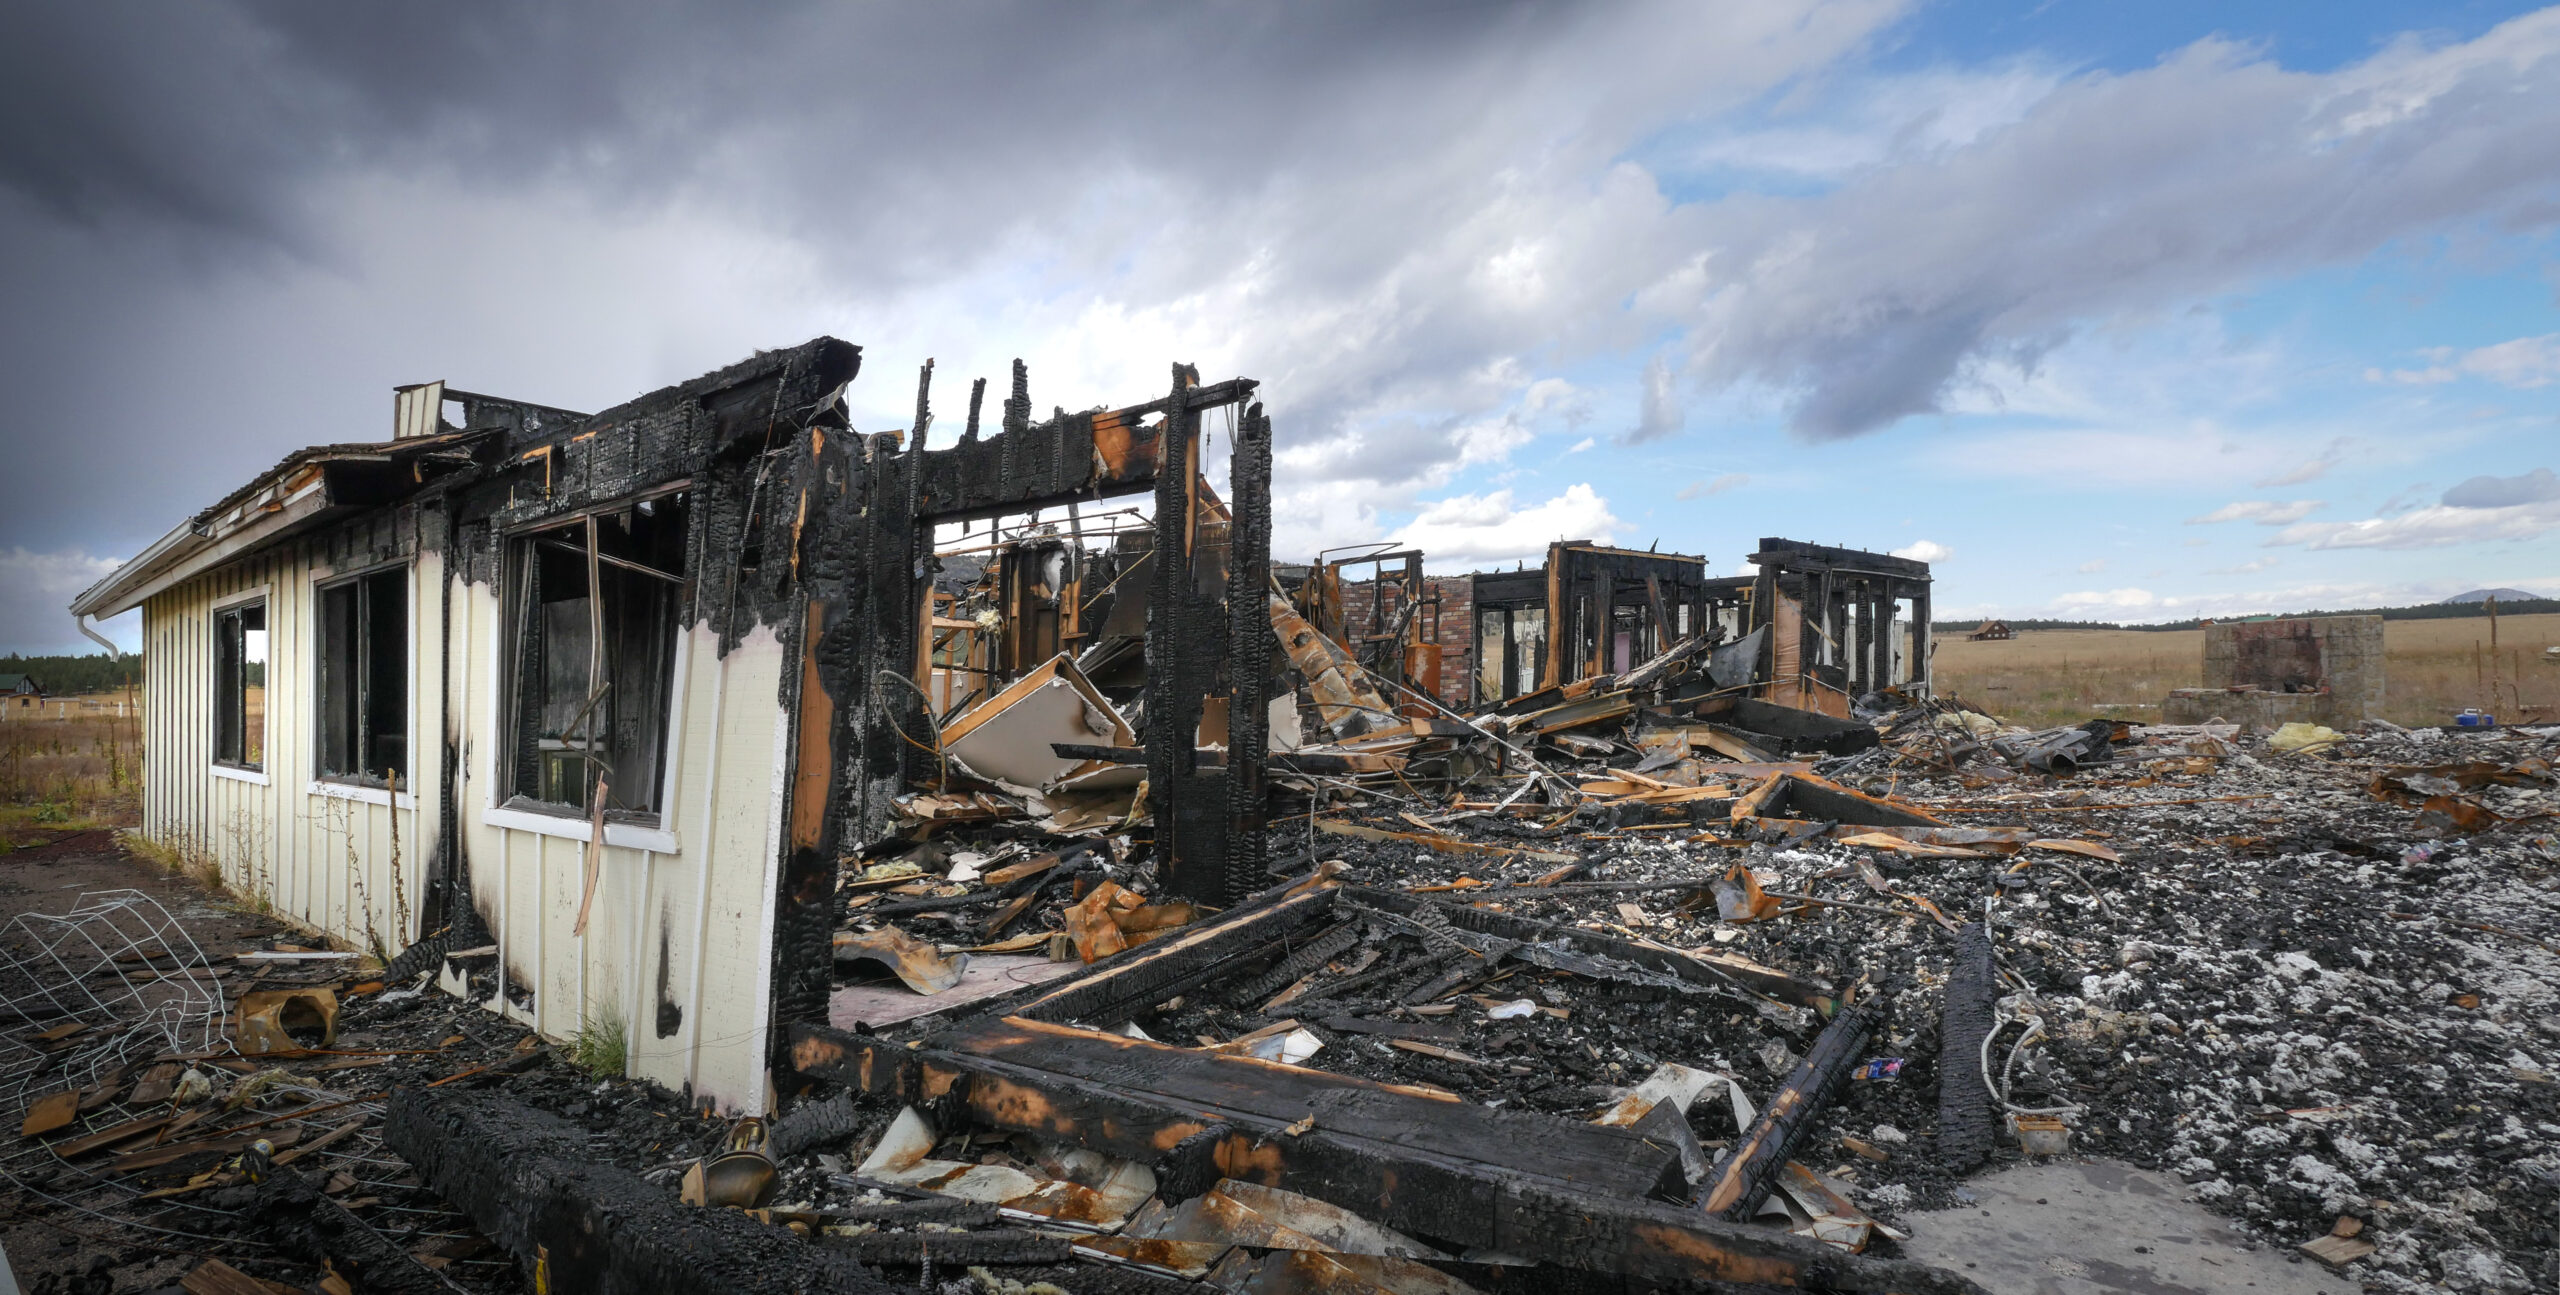 Finding the Best Attorney for Wildfire Property Loss Claims